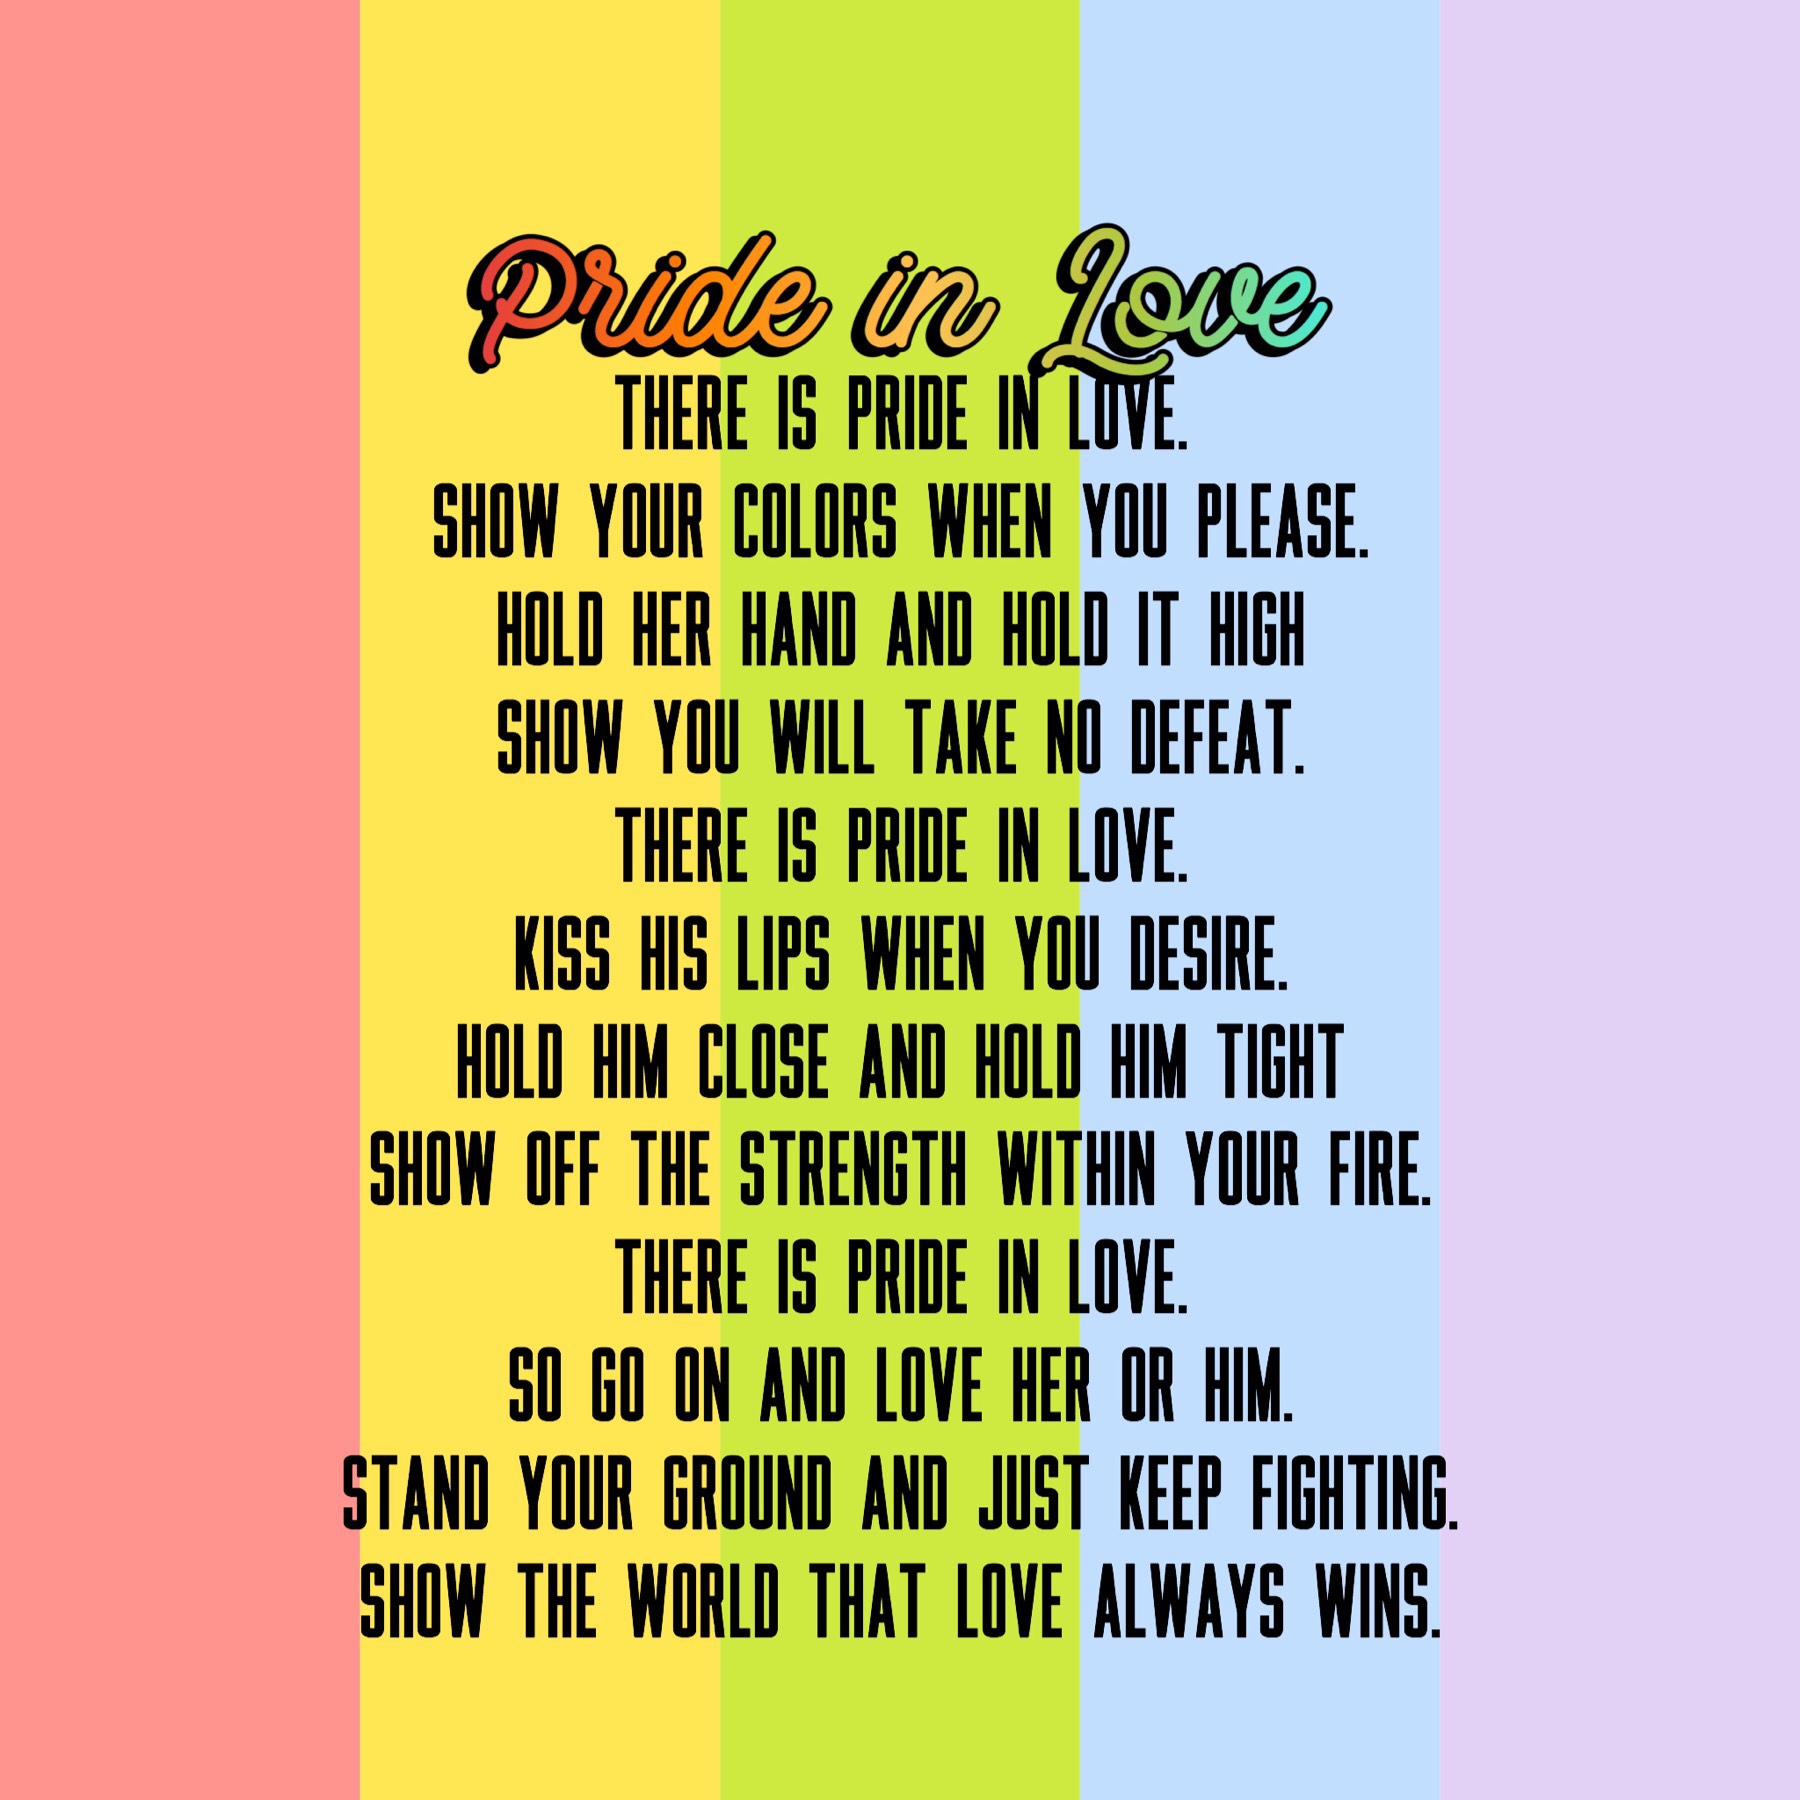 “🏳️‍🌈tap🏳️‍🌈”
Happy Pride Month, you lovely gems💎 This is not the best poem, but it is something. Out or not, straight or LGBTQ+, I hope you all are proud of who you are! You are wonderful, beautiful people who deserve all the pride & love in the world.~~